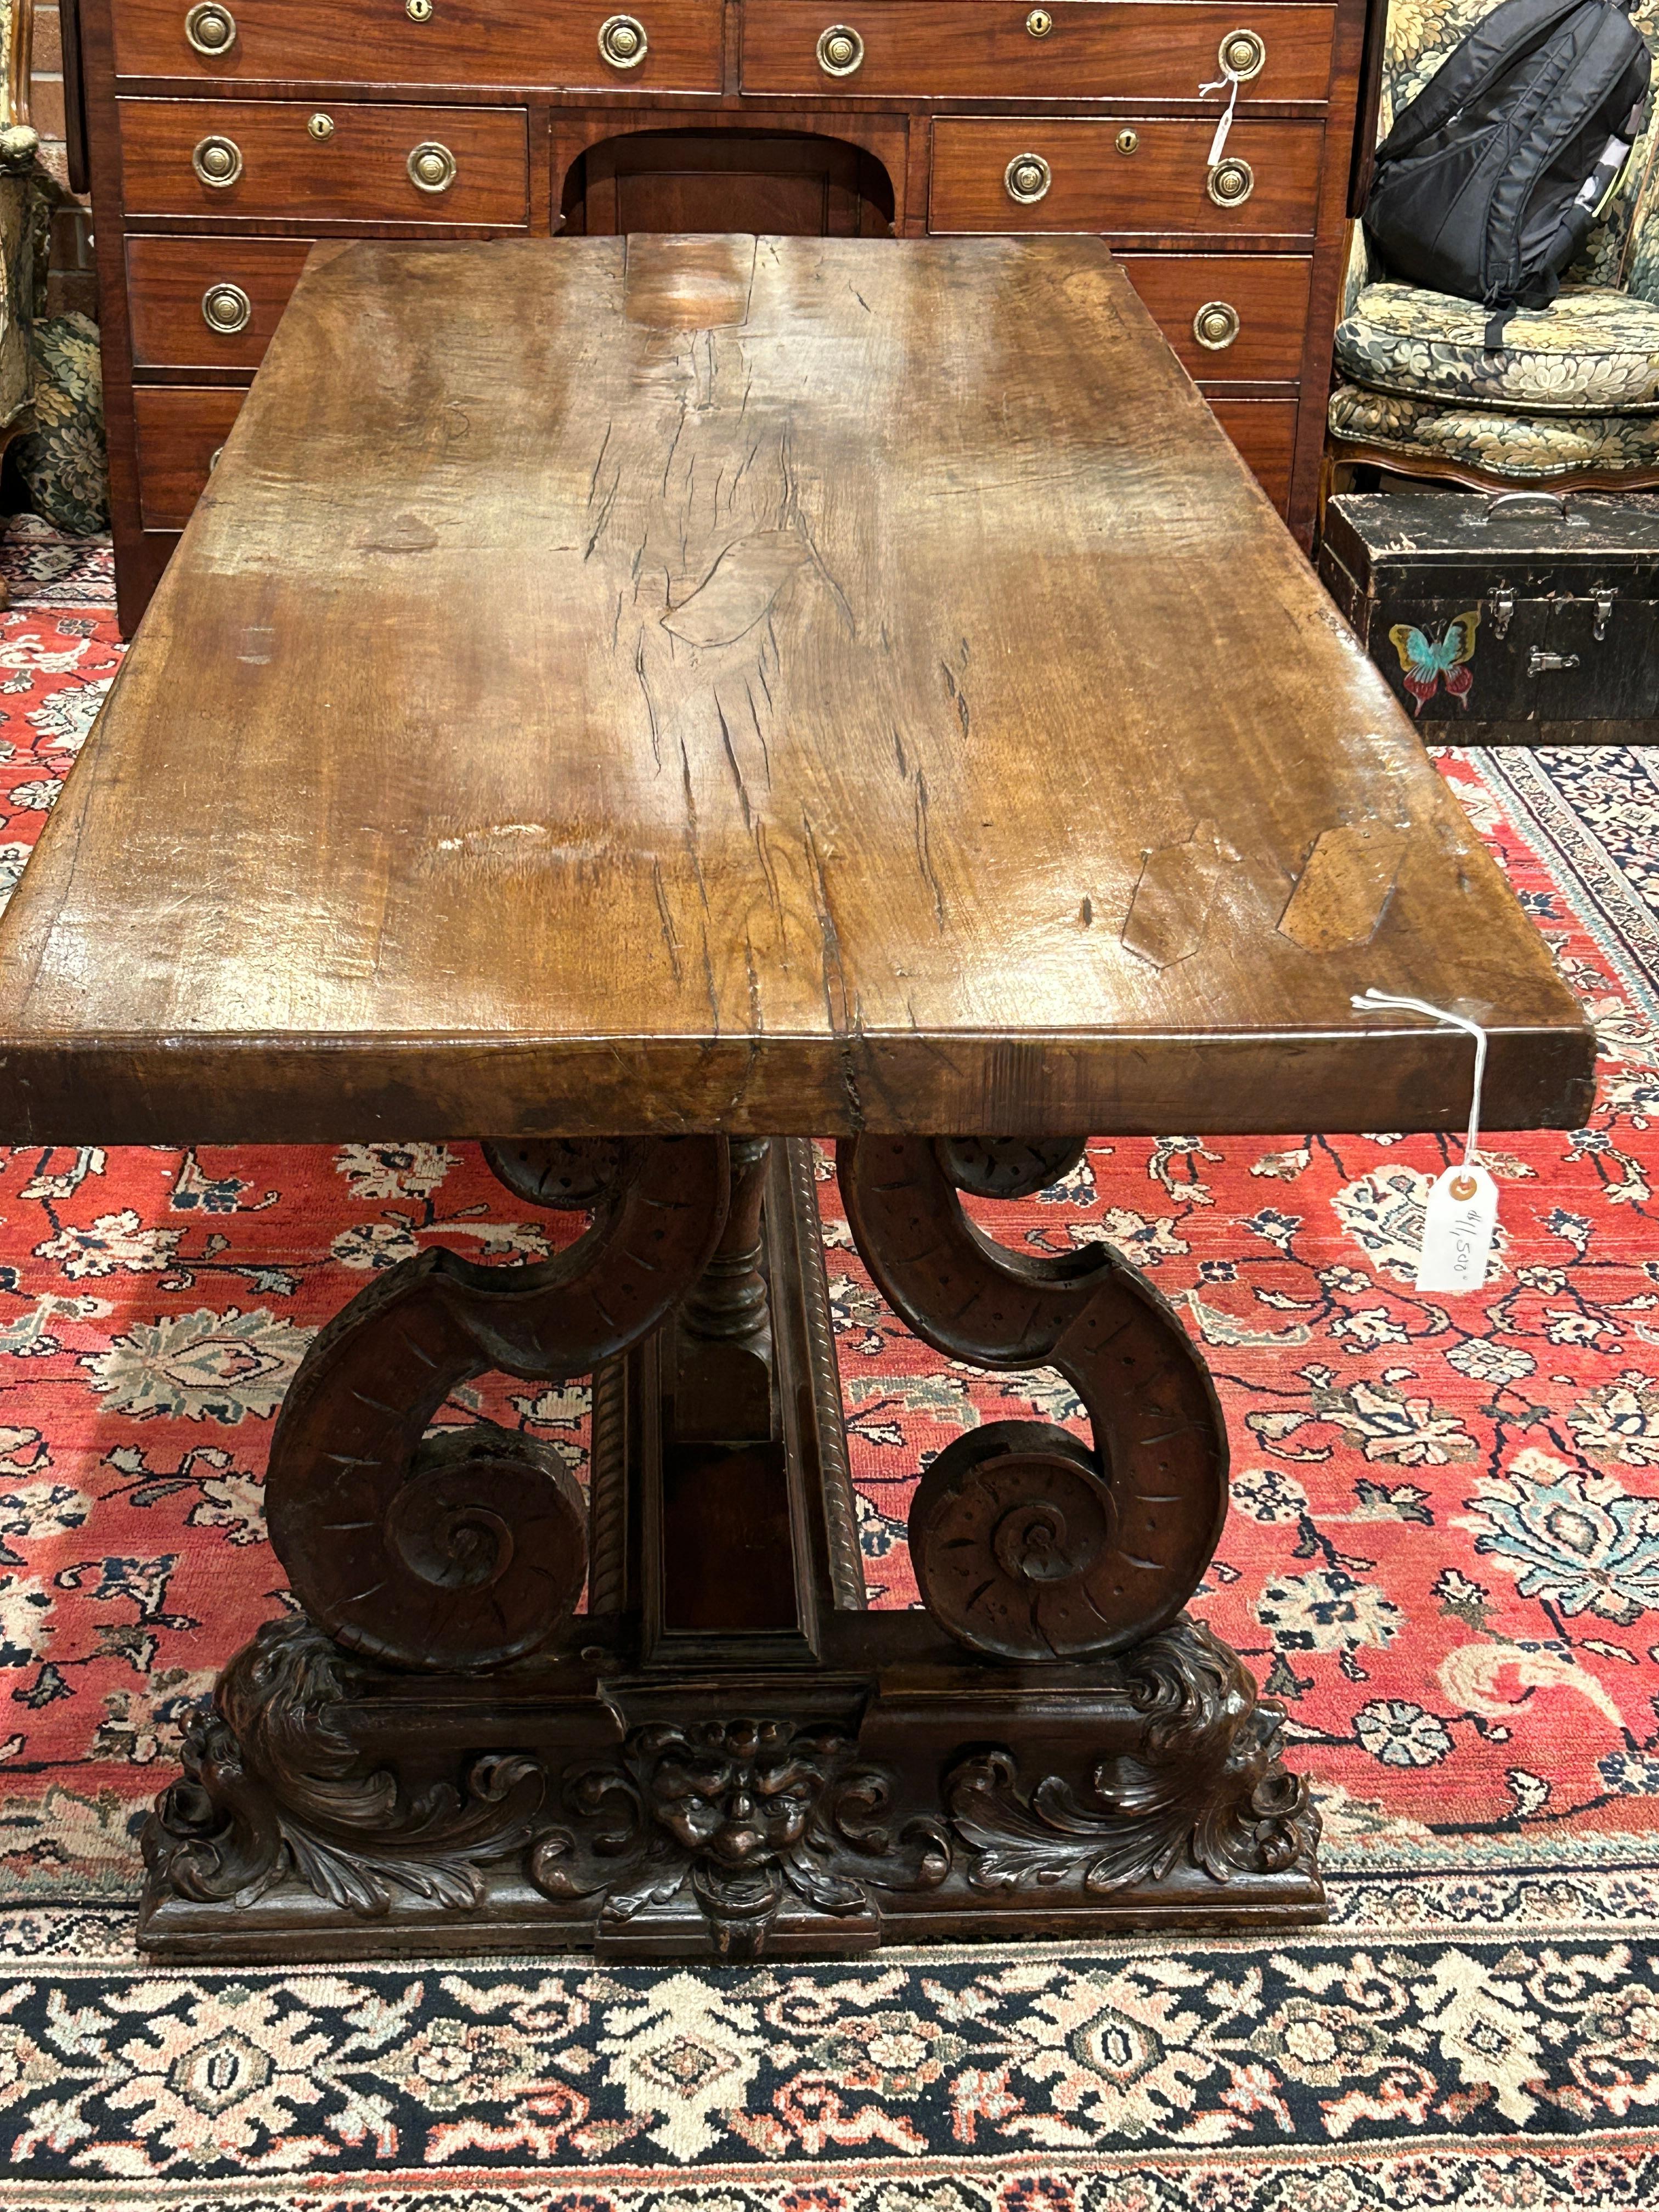 Introducing a stunning piece of furniture that is sure to elevate any living space, a late 17th century Italian walnut table in the Baroque style! This magnificent table boasts a solid piece of walnut for its top, providing a sturdy and durable